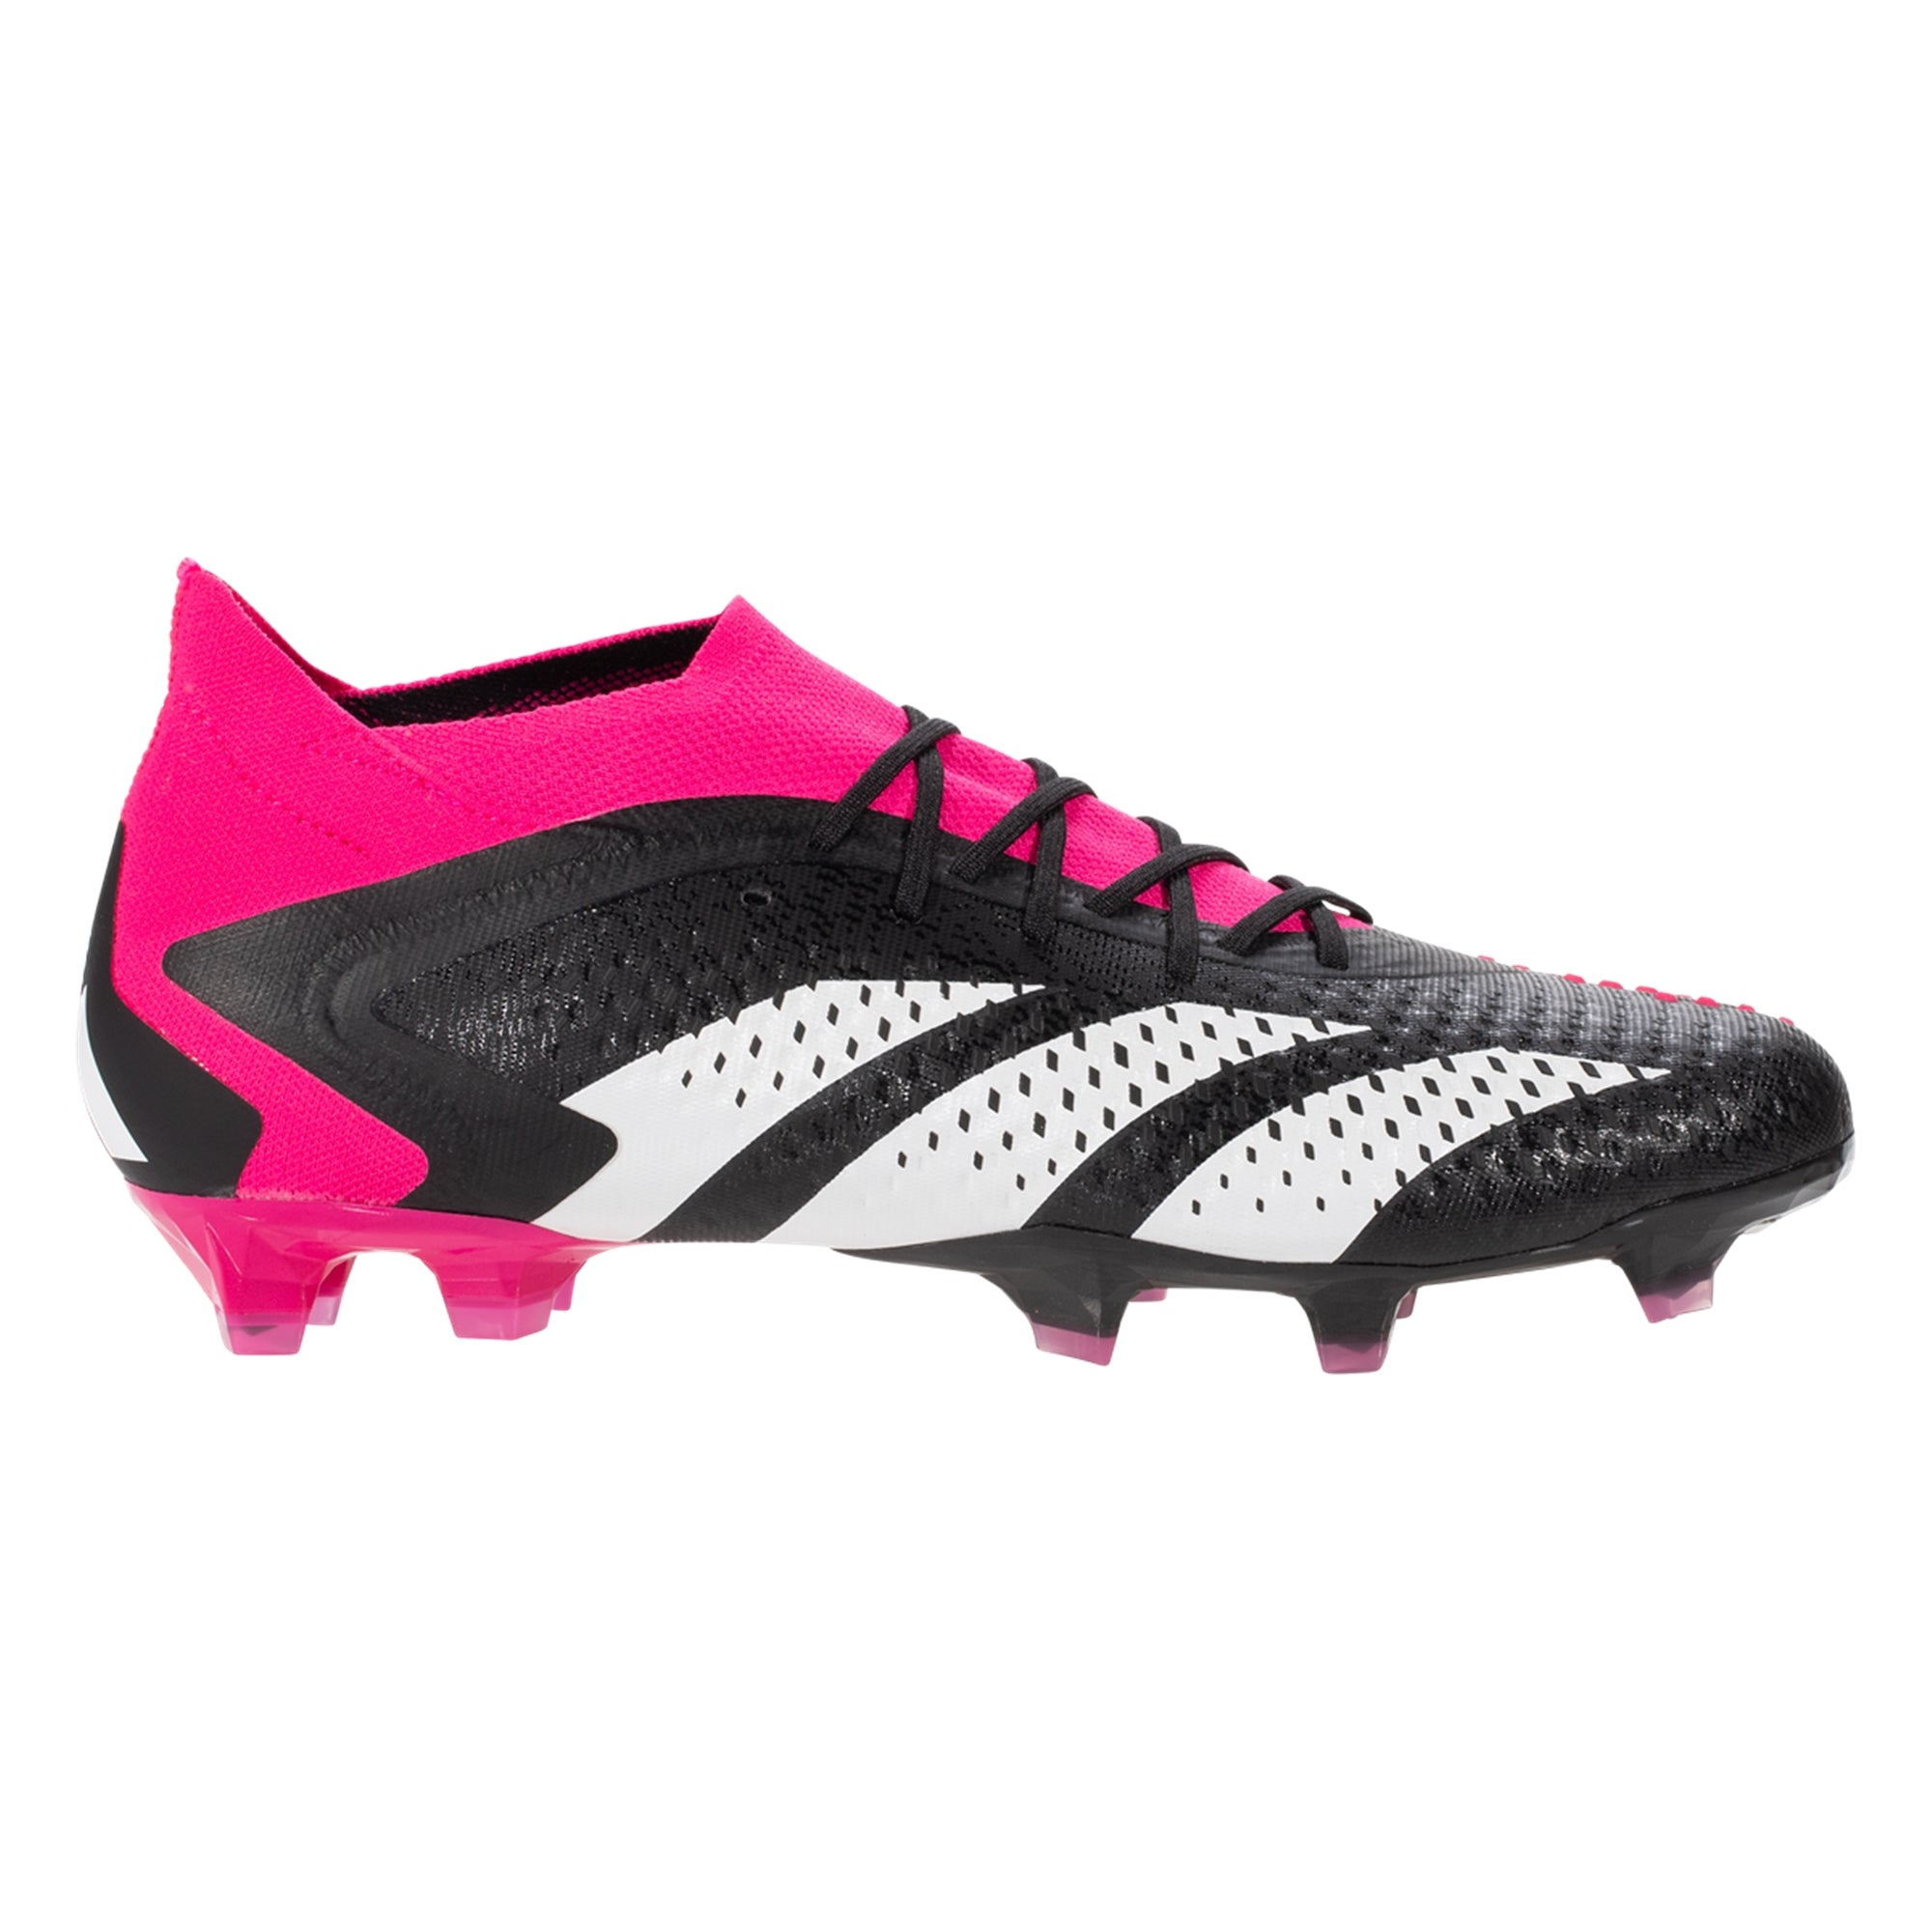 adidas Accuracy.1 FG Firm Soccer Cleats- Black/White/Pink – Zone USA